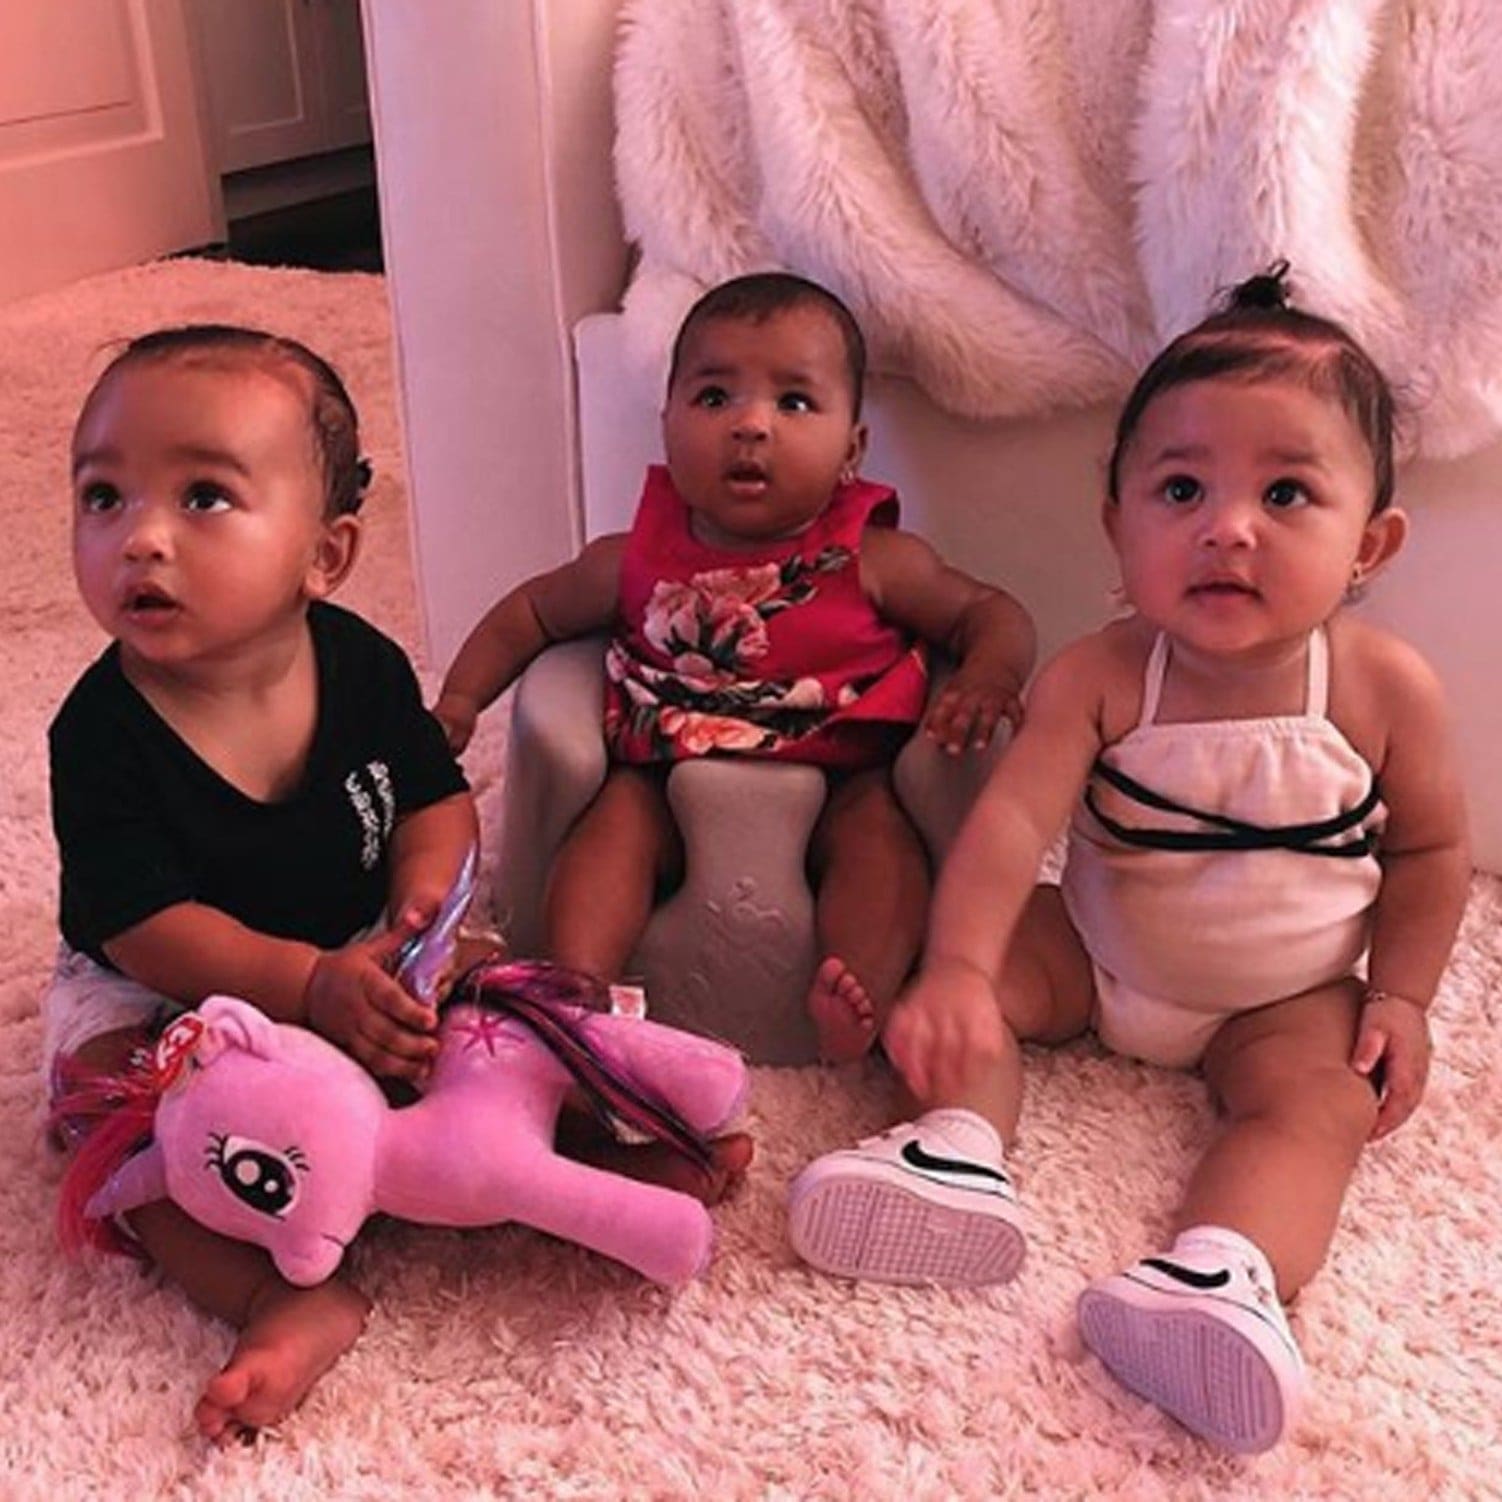 Kylie Jenner Shares Gorgeous Pics Of Stormi, True And Chicago And Fans Are Trying To Figure Out Who The Baby Girls Look Like